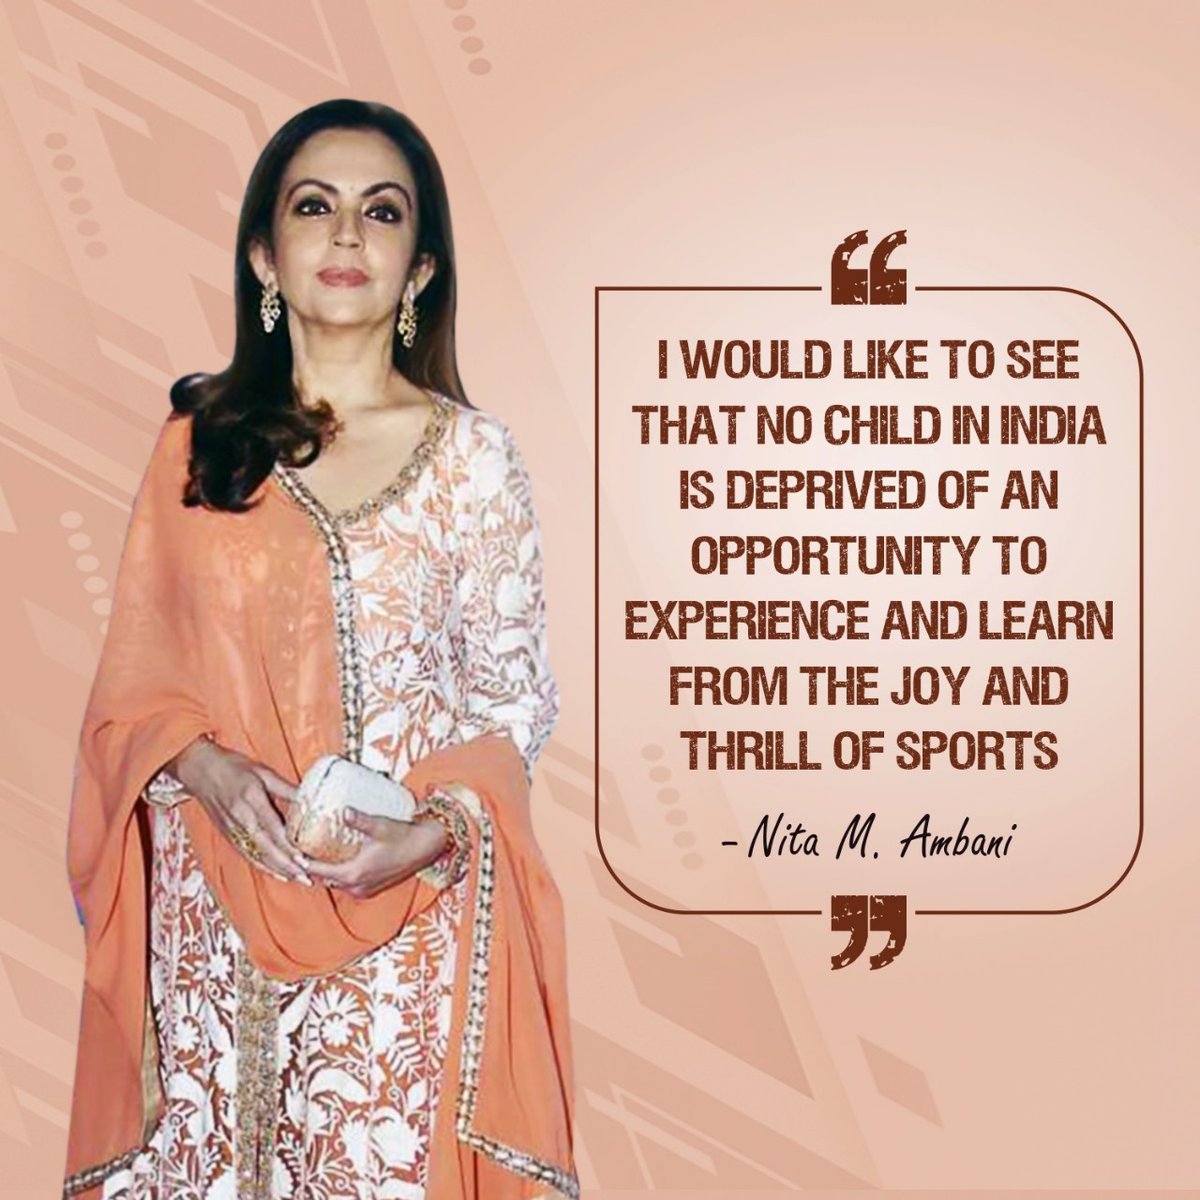 In the domains of sports and education, let's launch a movement with Nita Ambani ji. From kids to parents to elderly, sports are for everyone.
#NitaAmbani #EducationandSportsForAll #sports #Ambani #inspirational